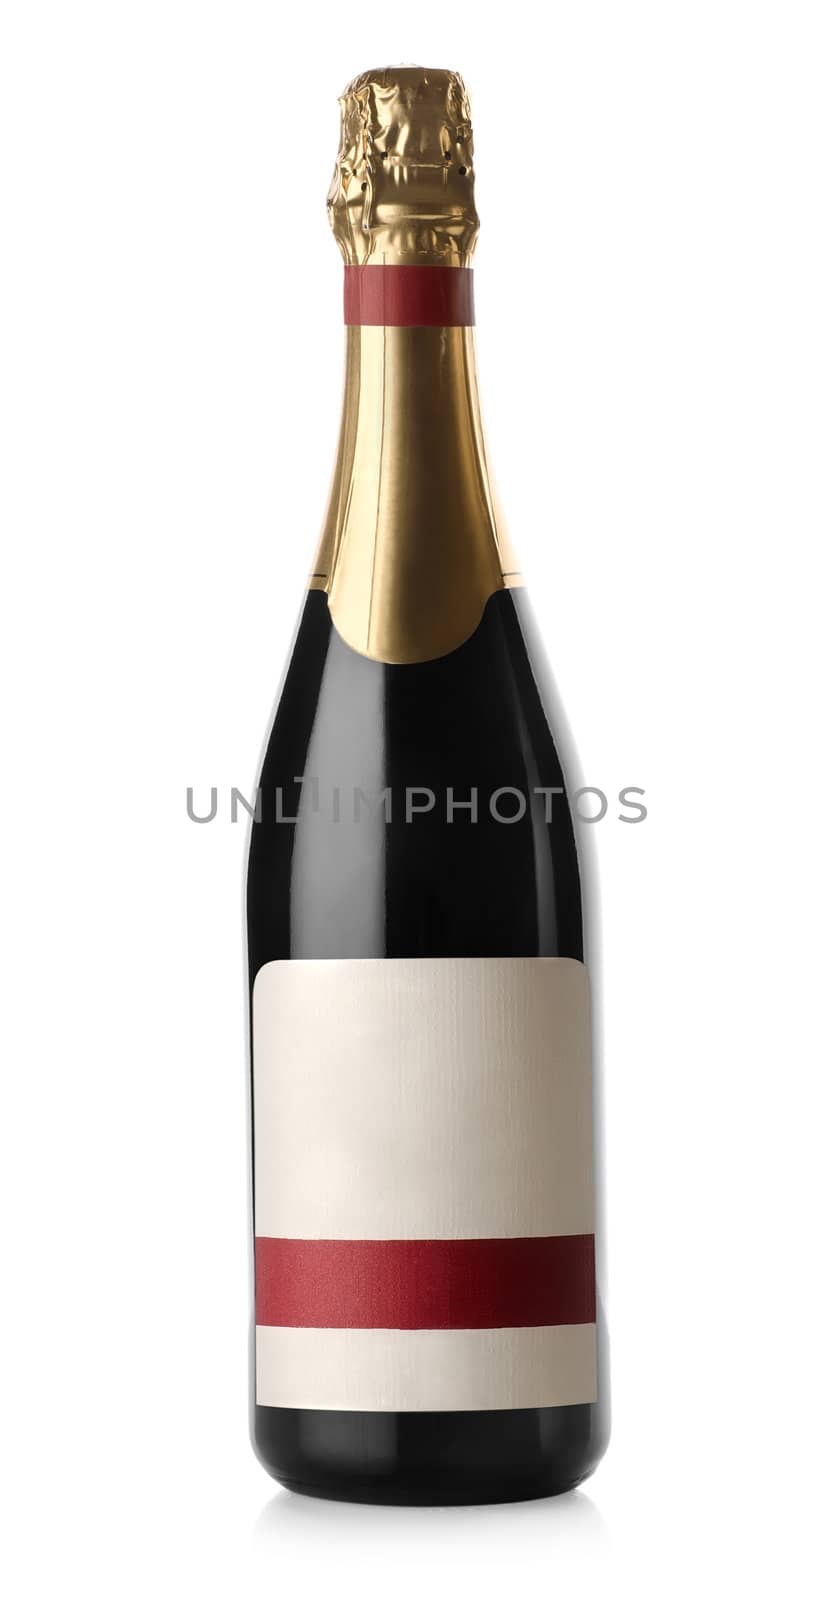 Champagne bottle by Givaga